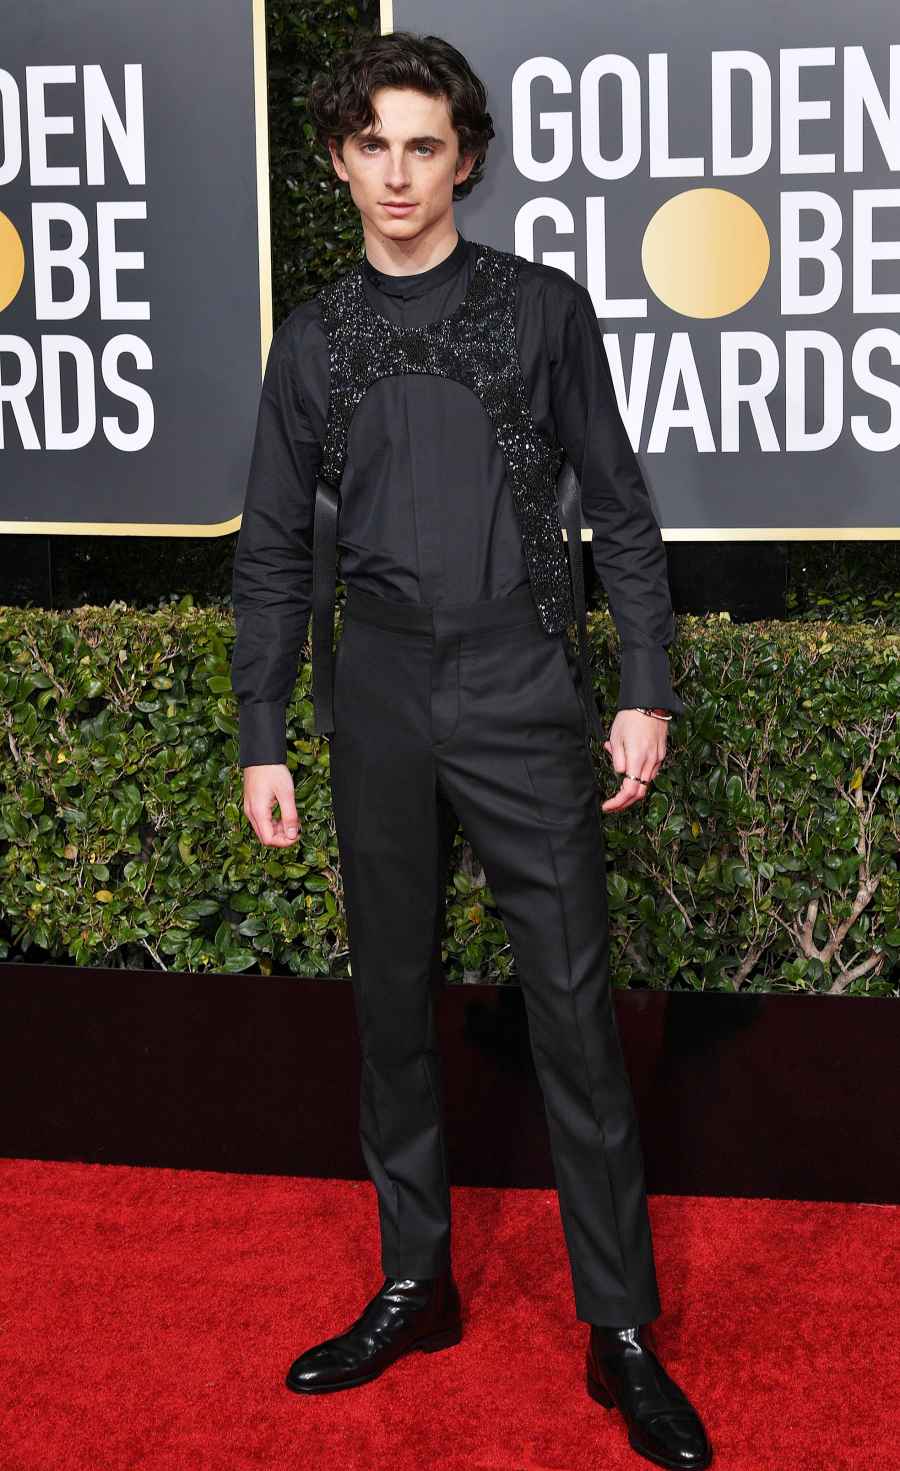 Most Influencial Dressers 2019 - Timothee Chalamet